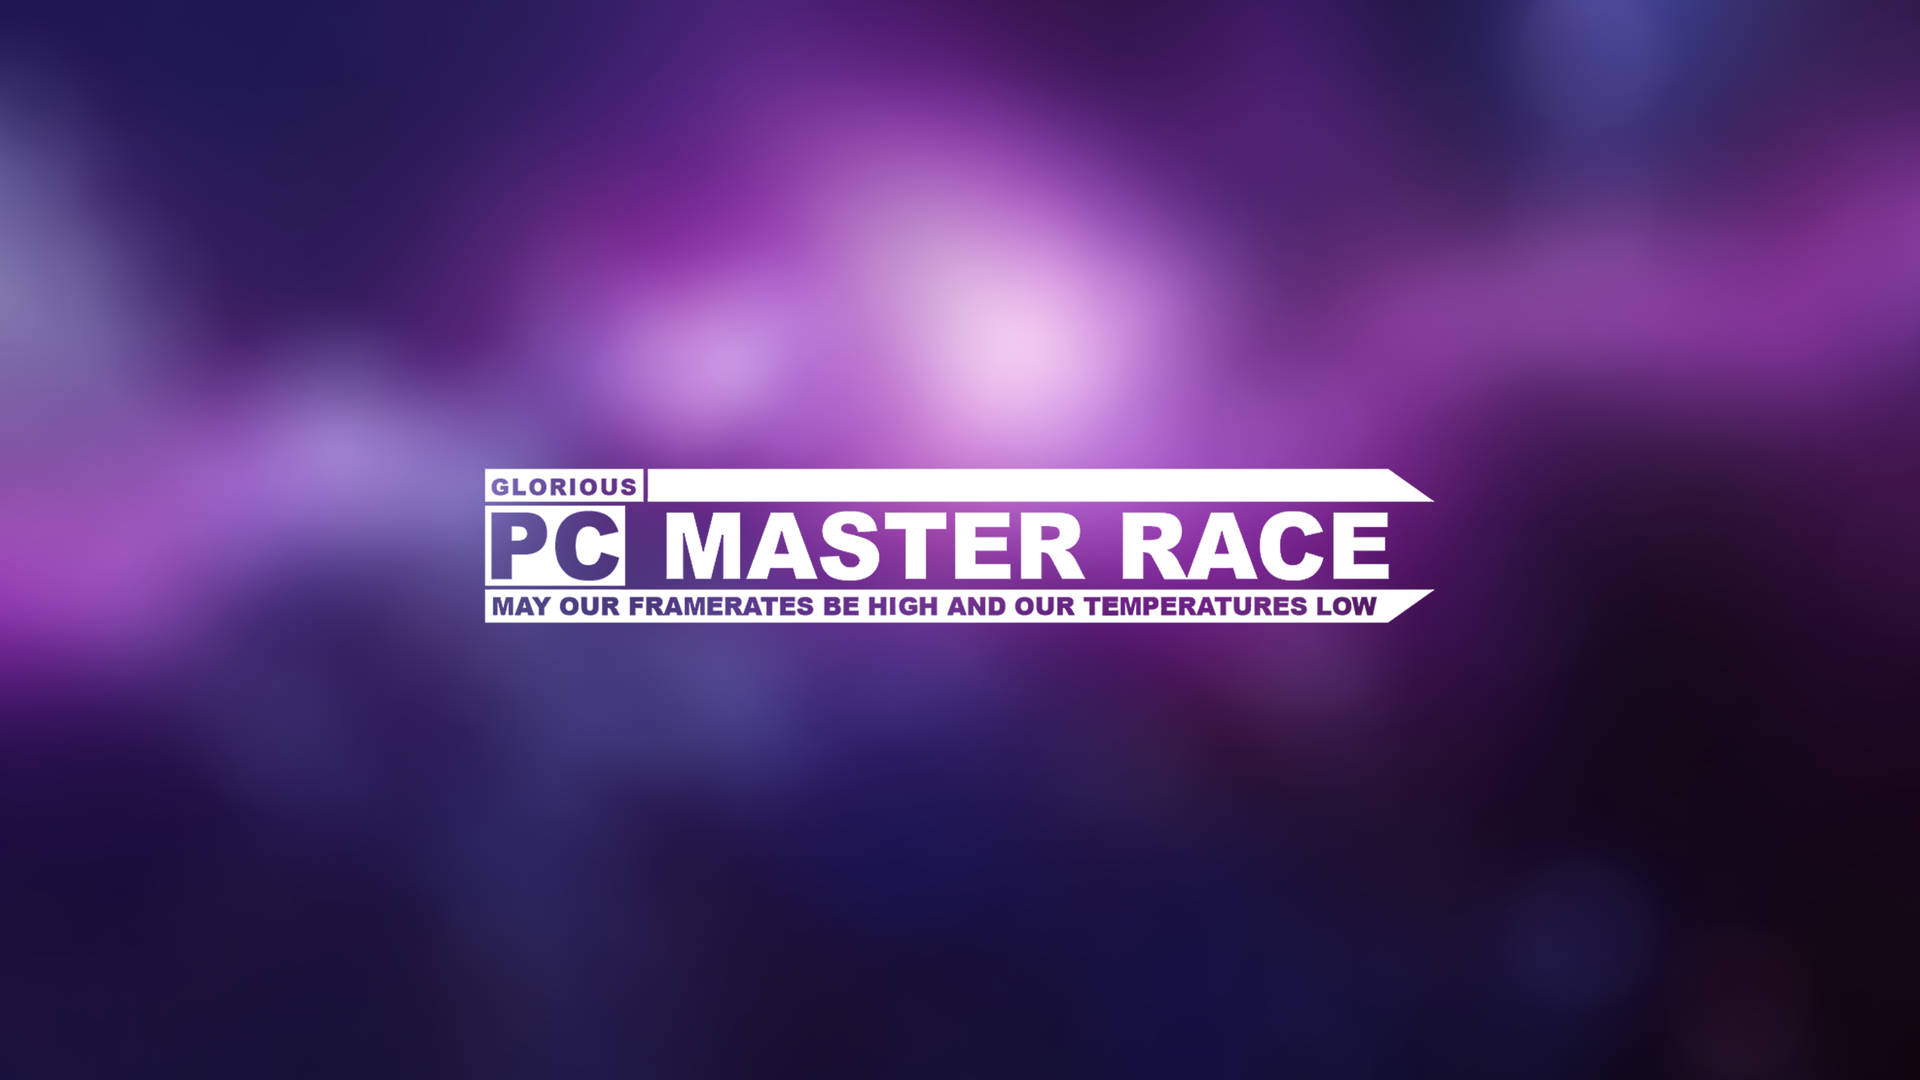 Pc Master Race Blurred Violet Picture